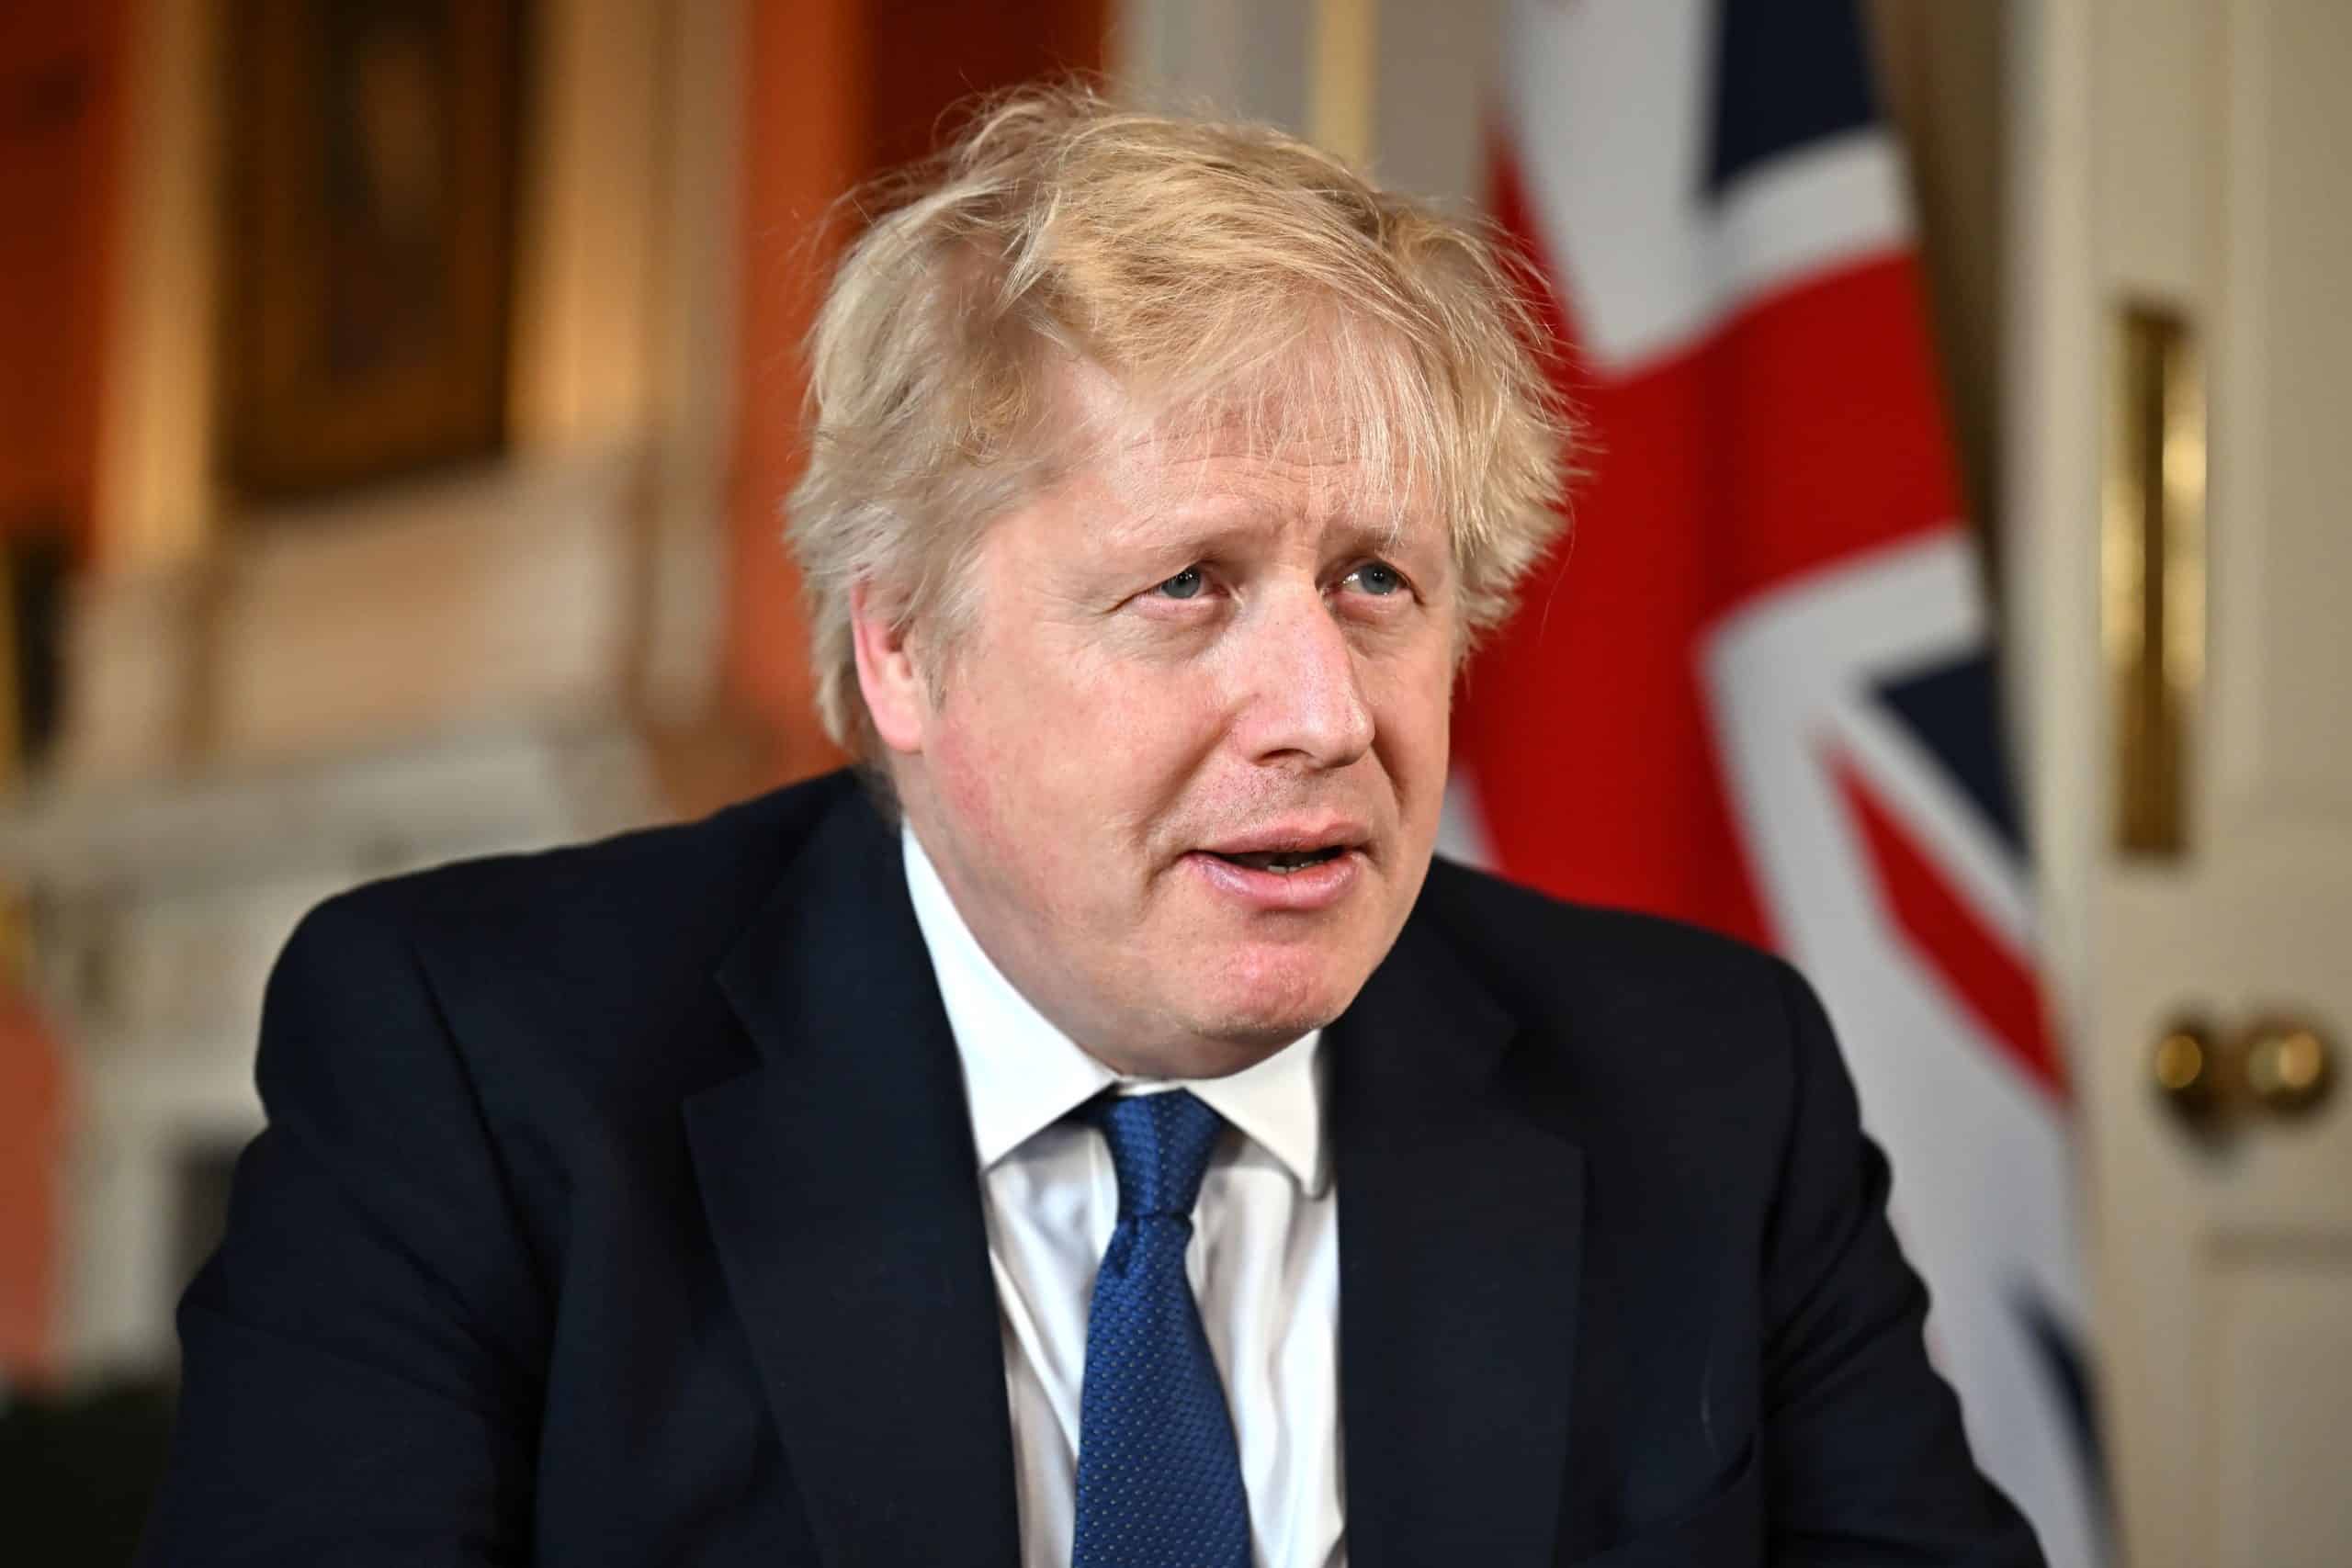 Johnson’s seat at risk in election – along with half the Cabinet, poll shows